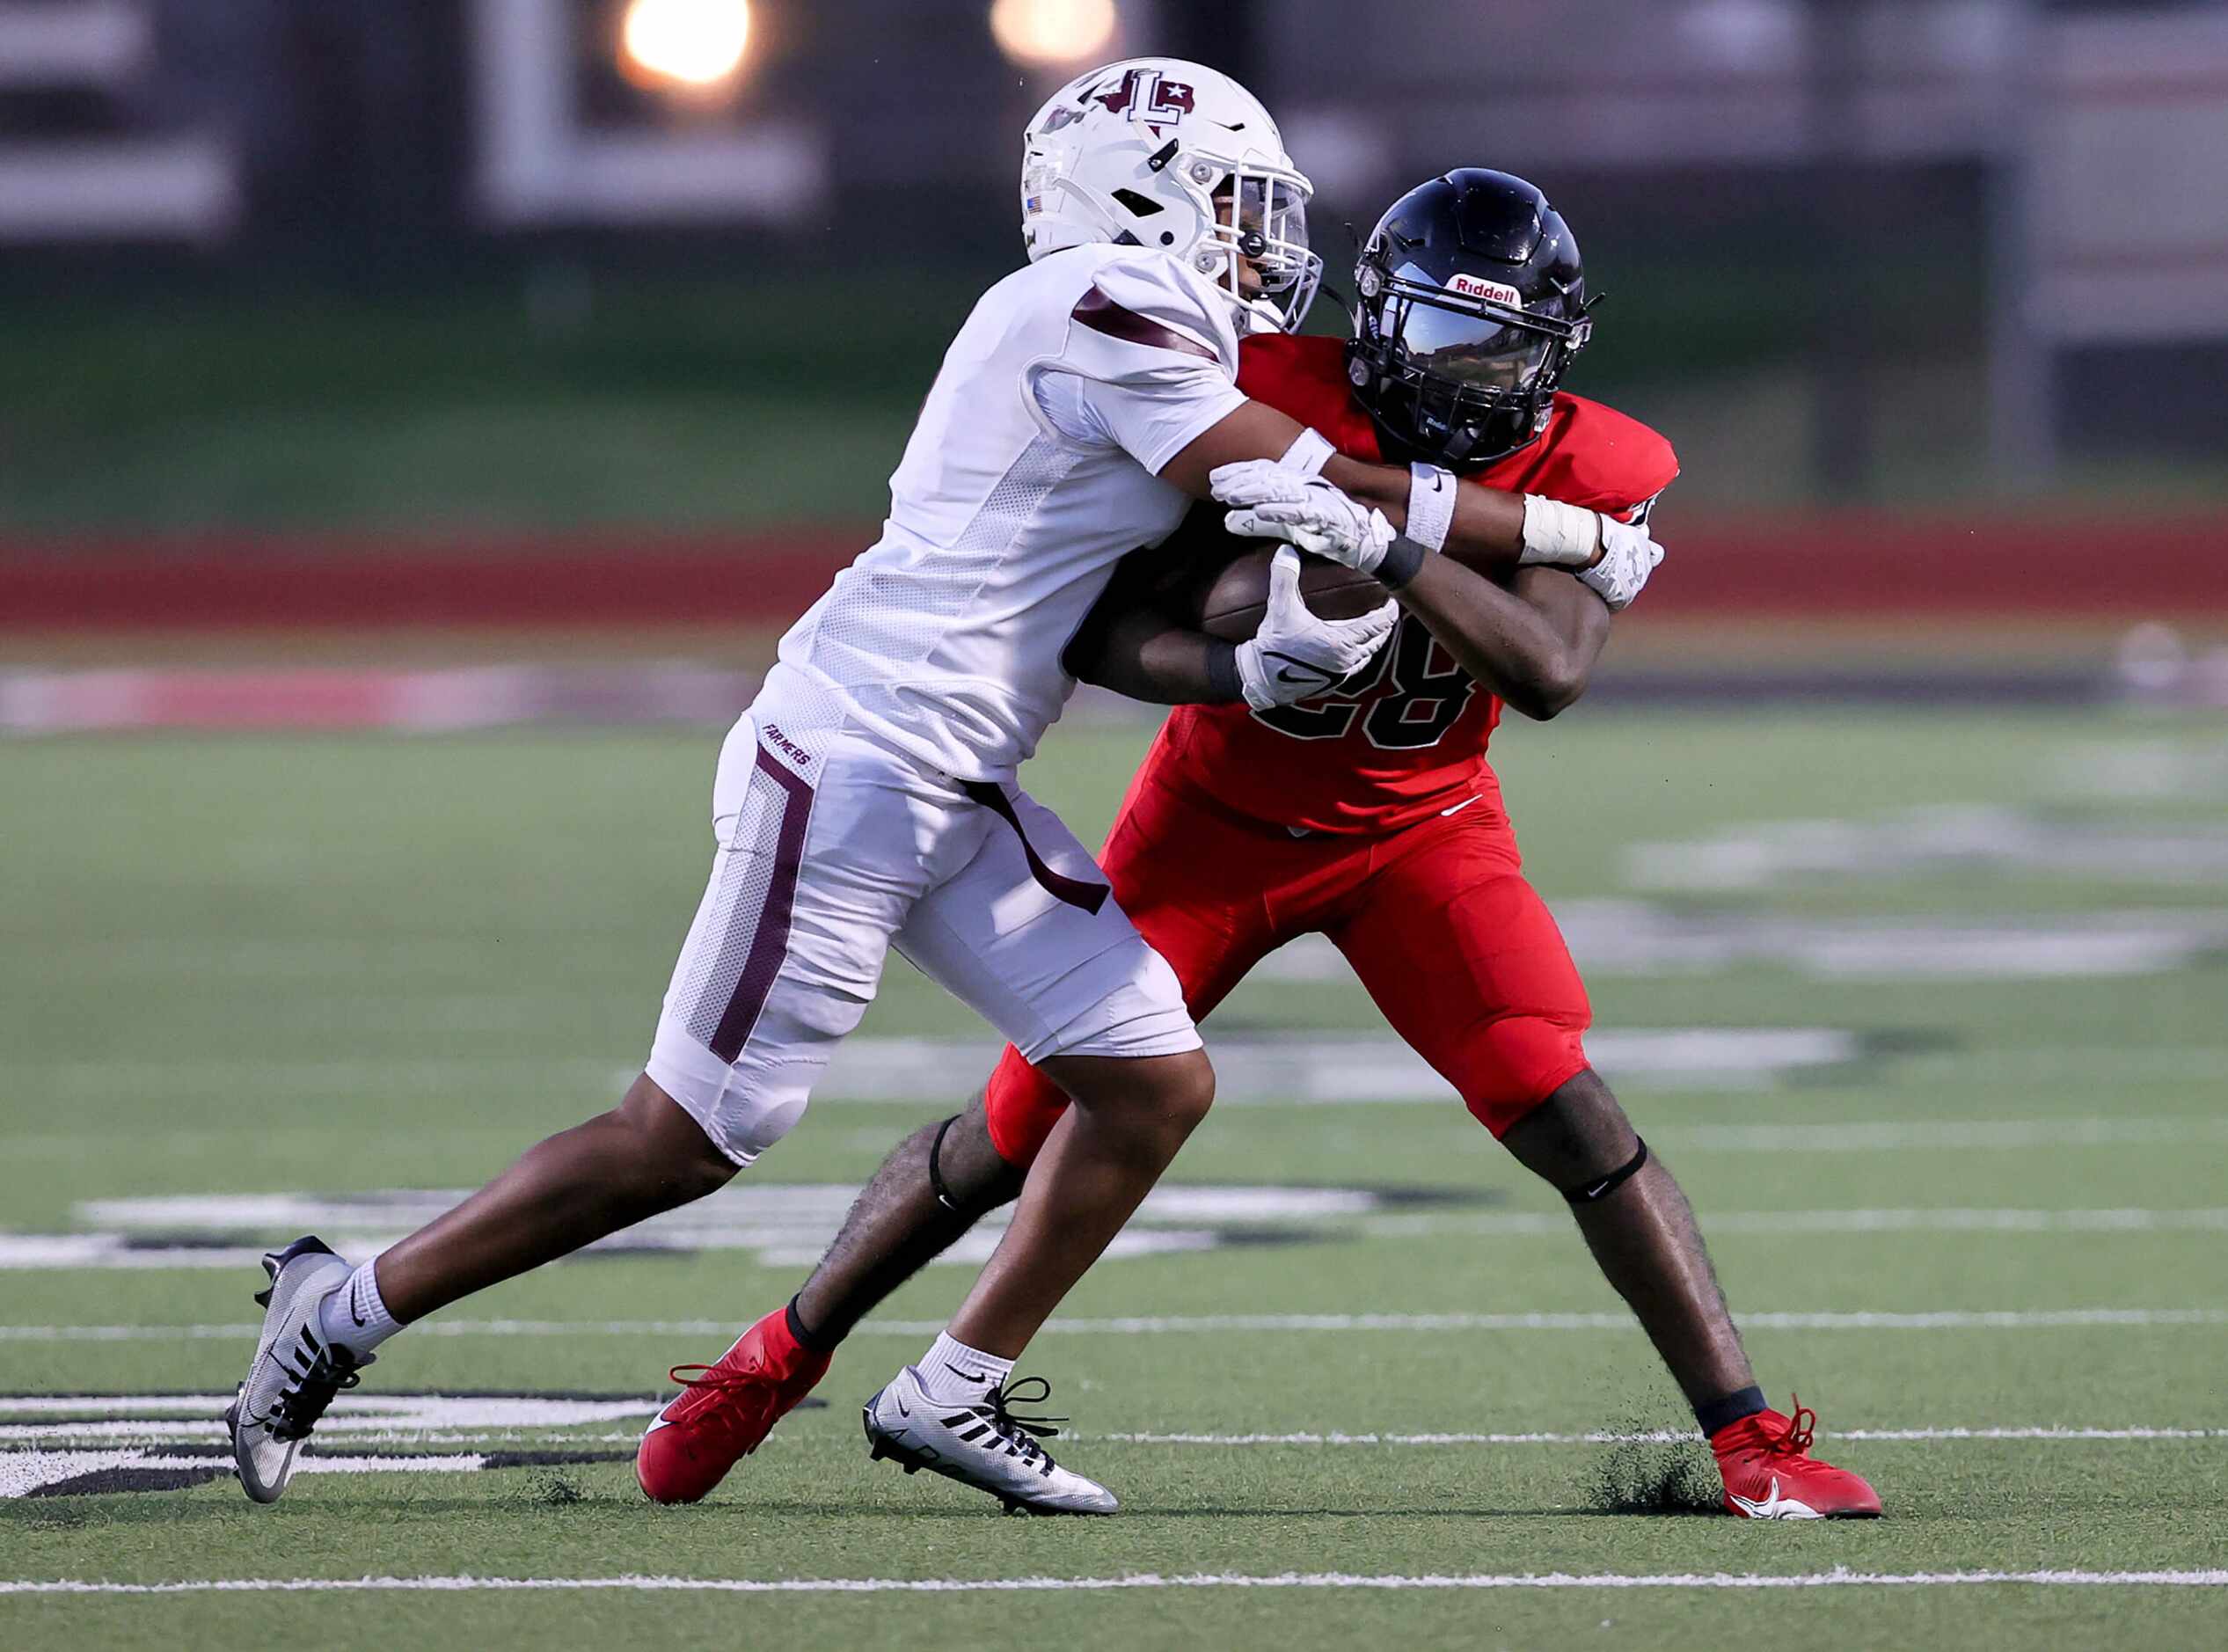 Coppell running back Xavier Mosely (28) is stopped by Lewisville defensive back Ke'Shawn...